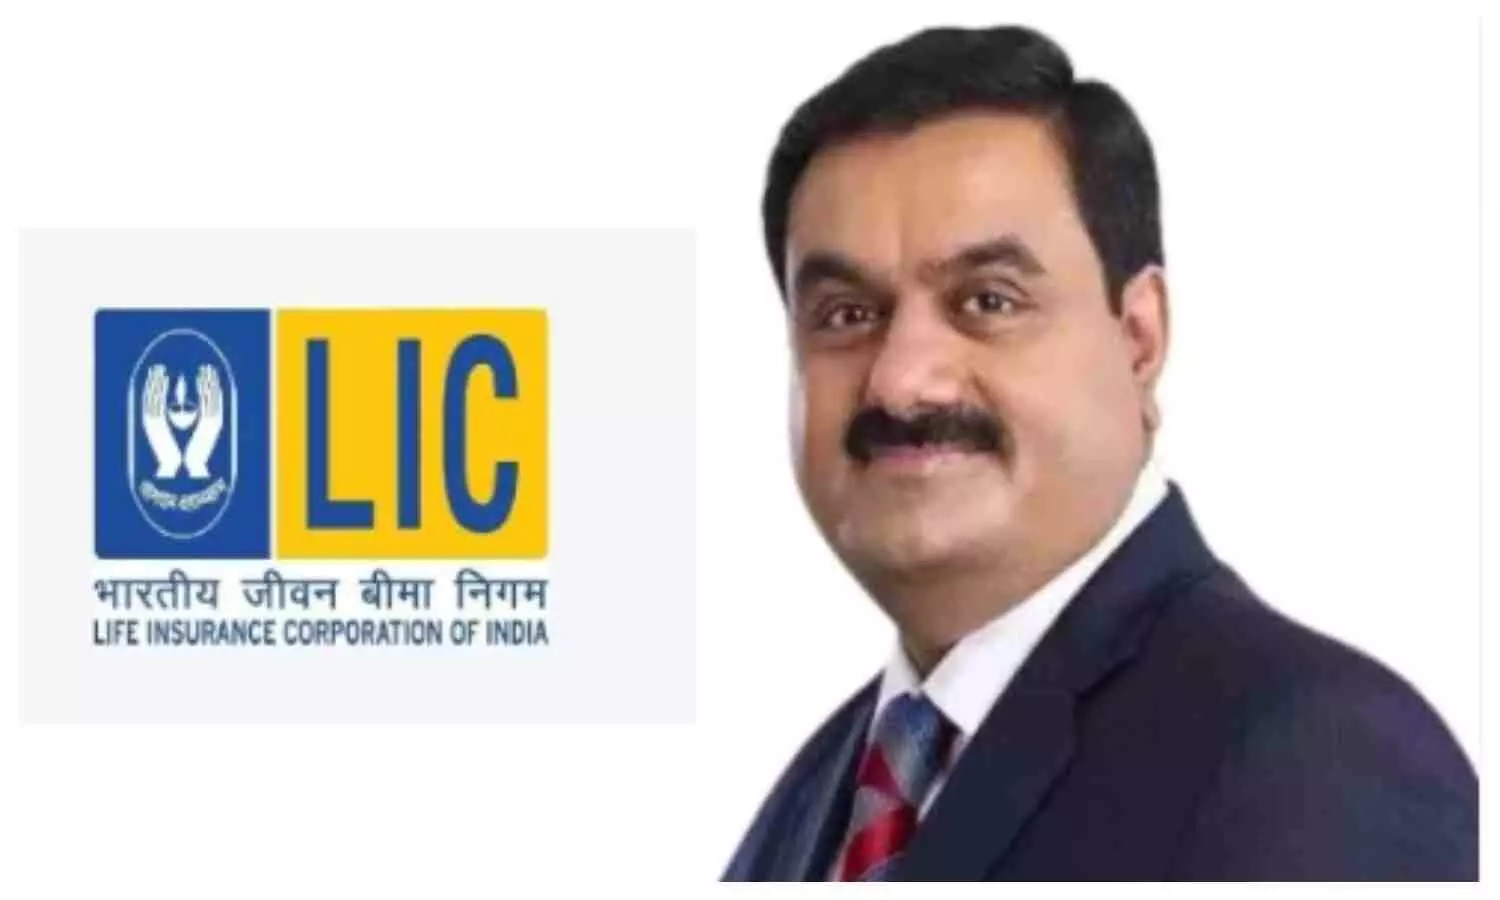 LIC to talk with Adani Group over Hindenburg Report